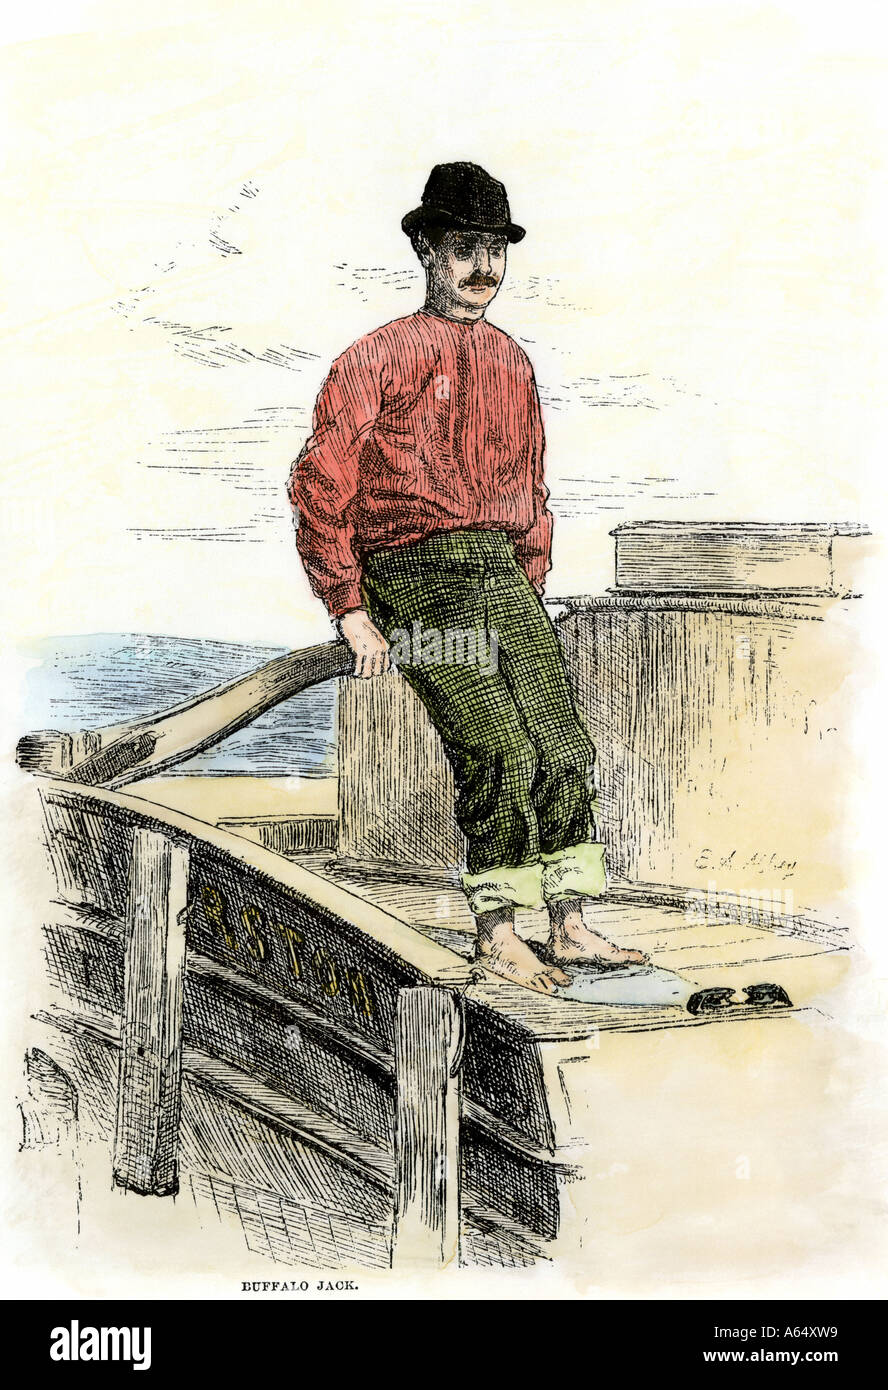 Buffalo Jack a canal boat pilot on the Erie Canal in New York State 1800s. Hand-colored woodcut Stock Photo